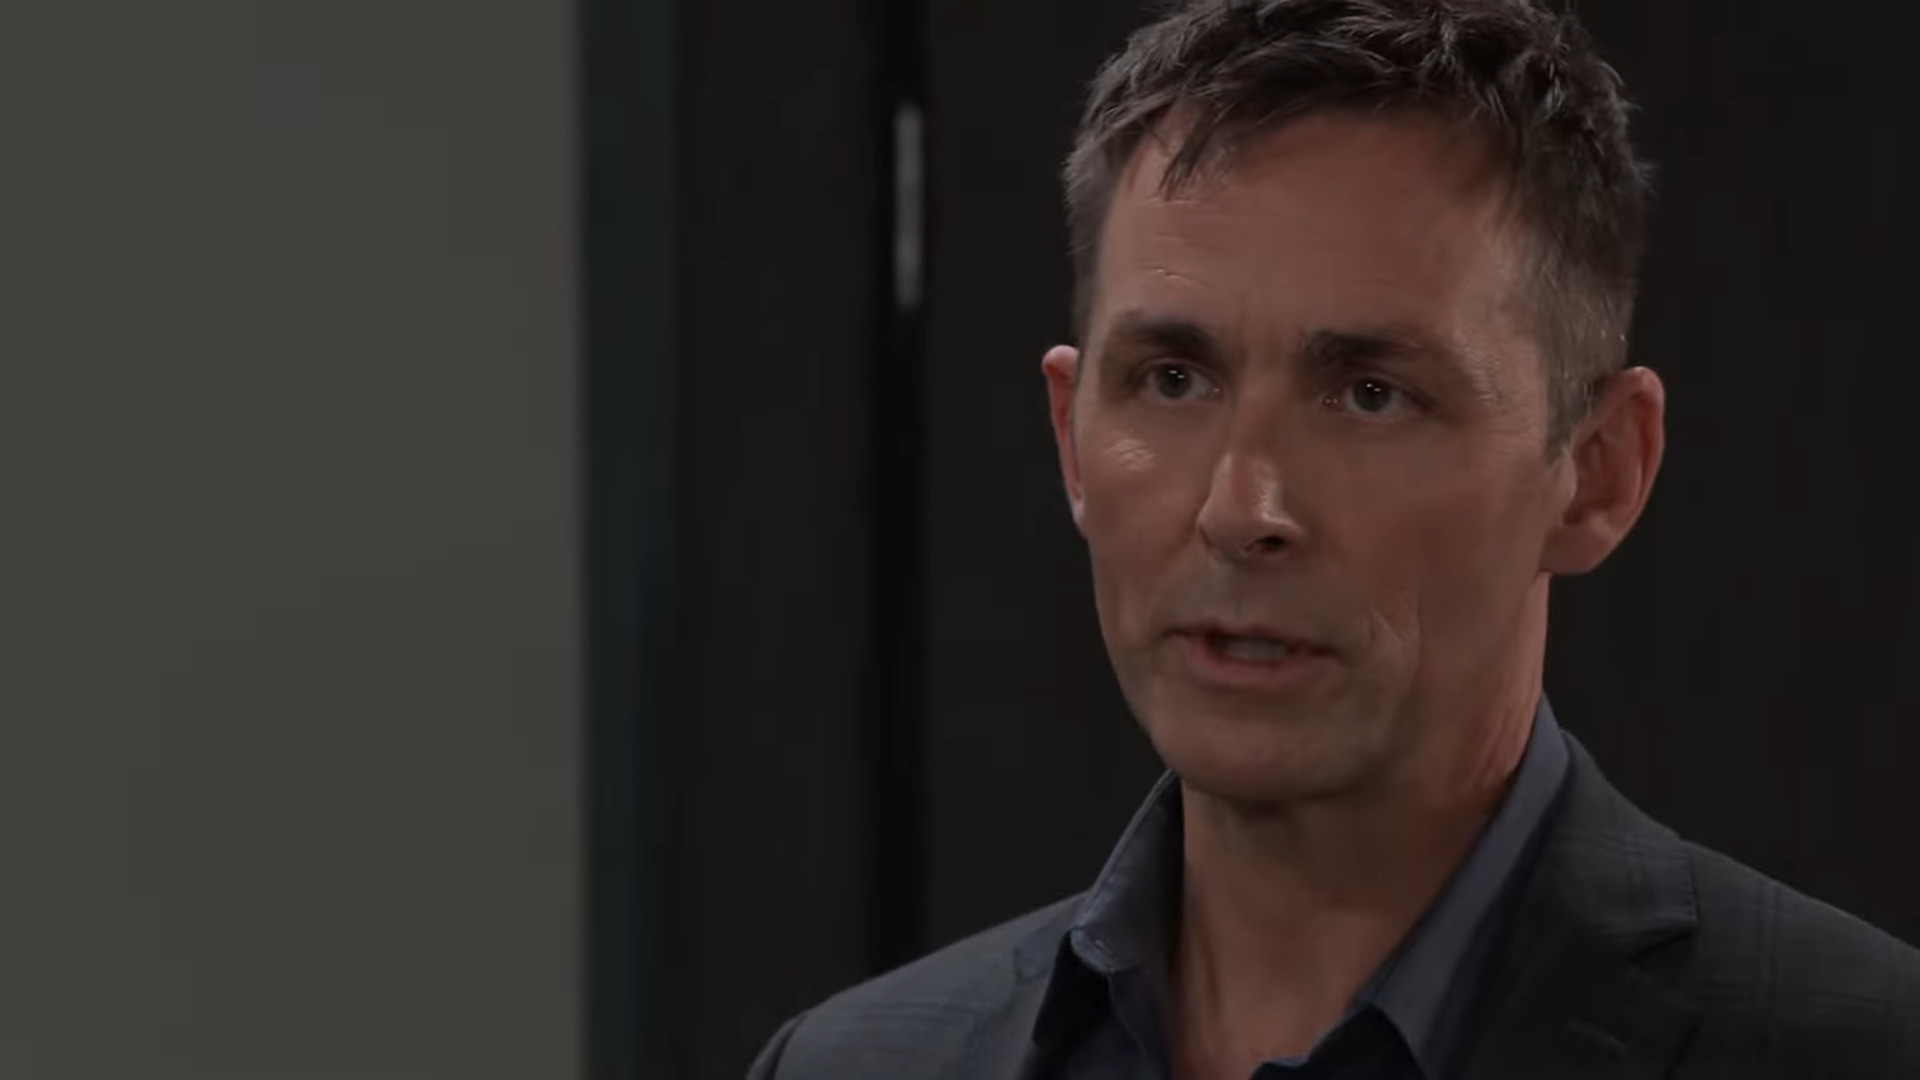 valentin questions lucy GH